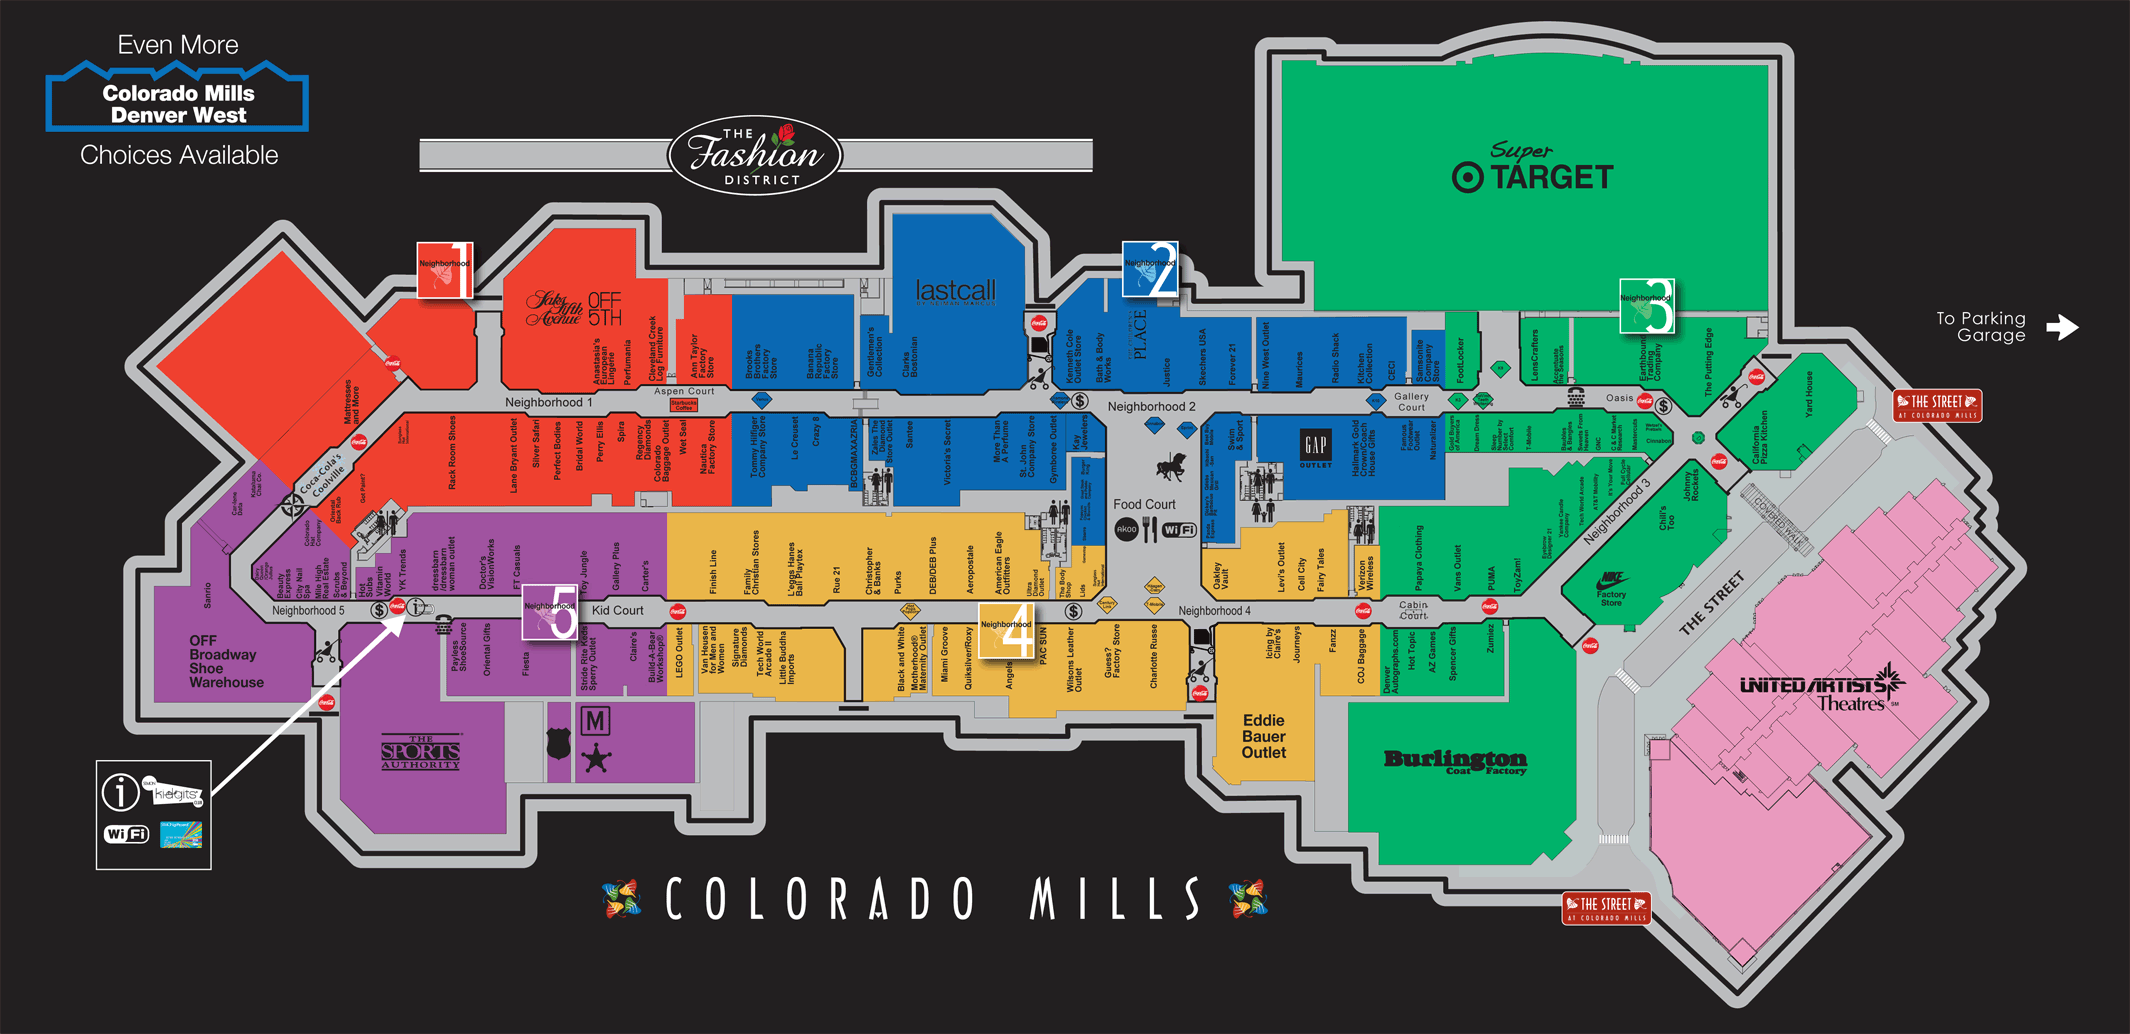 Colorado Mills Mall Map 2020 - Welcome To Gurnee Mills A Shopping